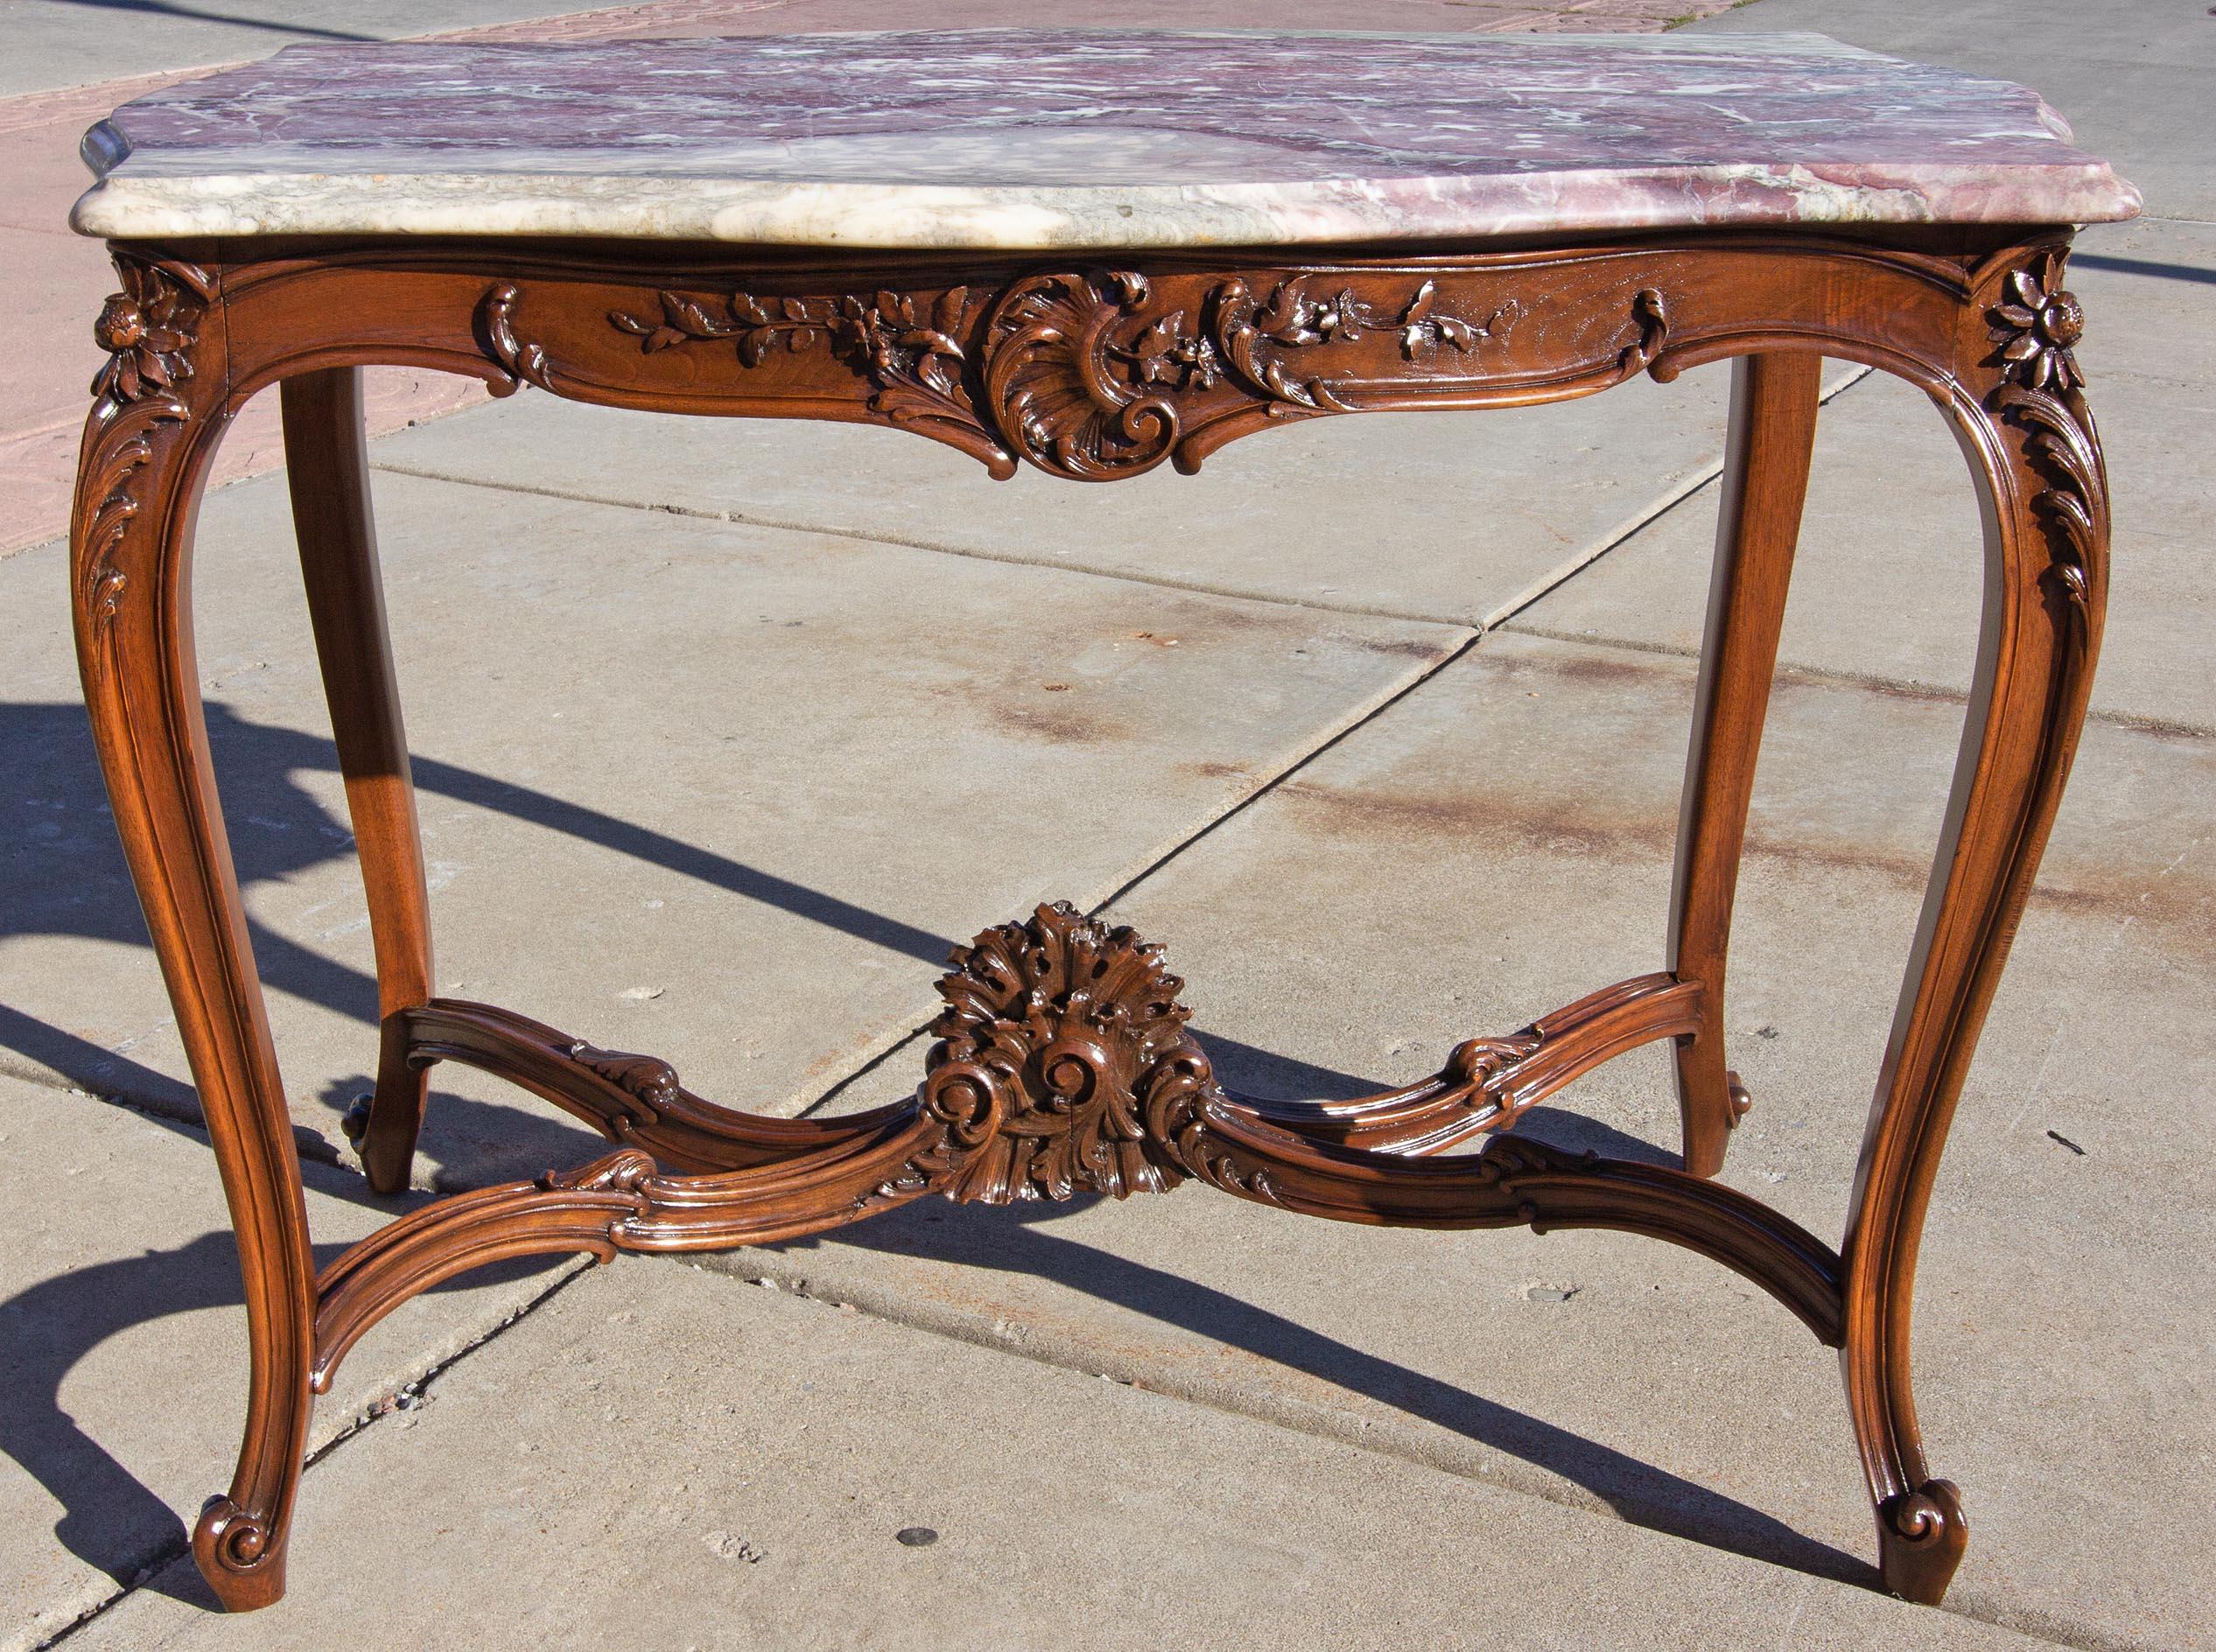 19th century French marble top side table. Beautiful mauve and gray graphic marble top. Hand carved walnut base.
  